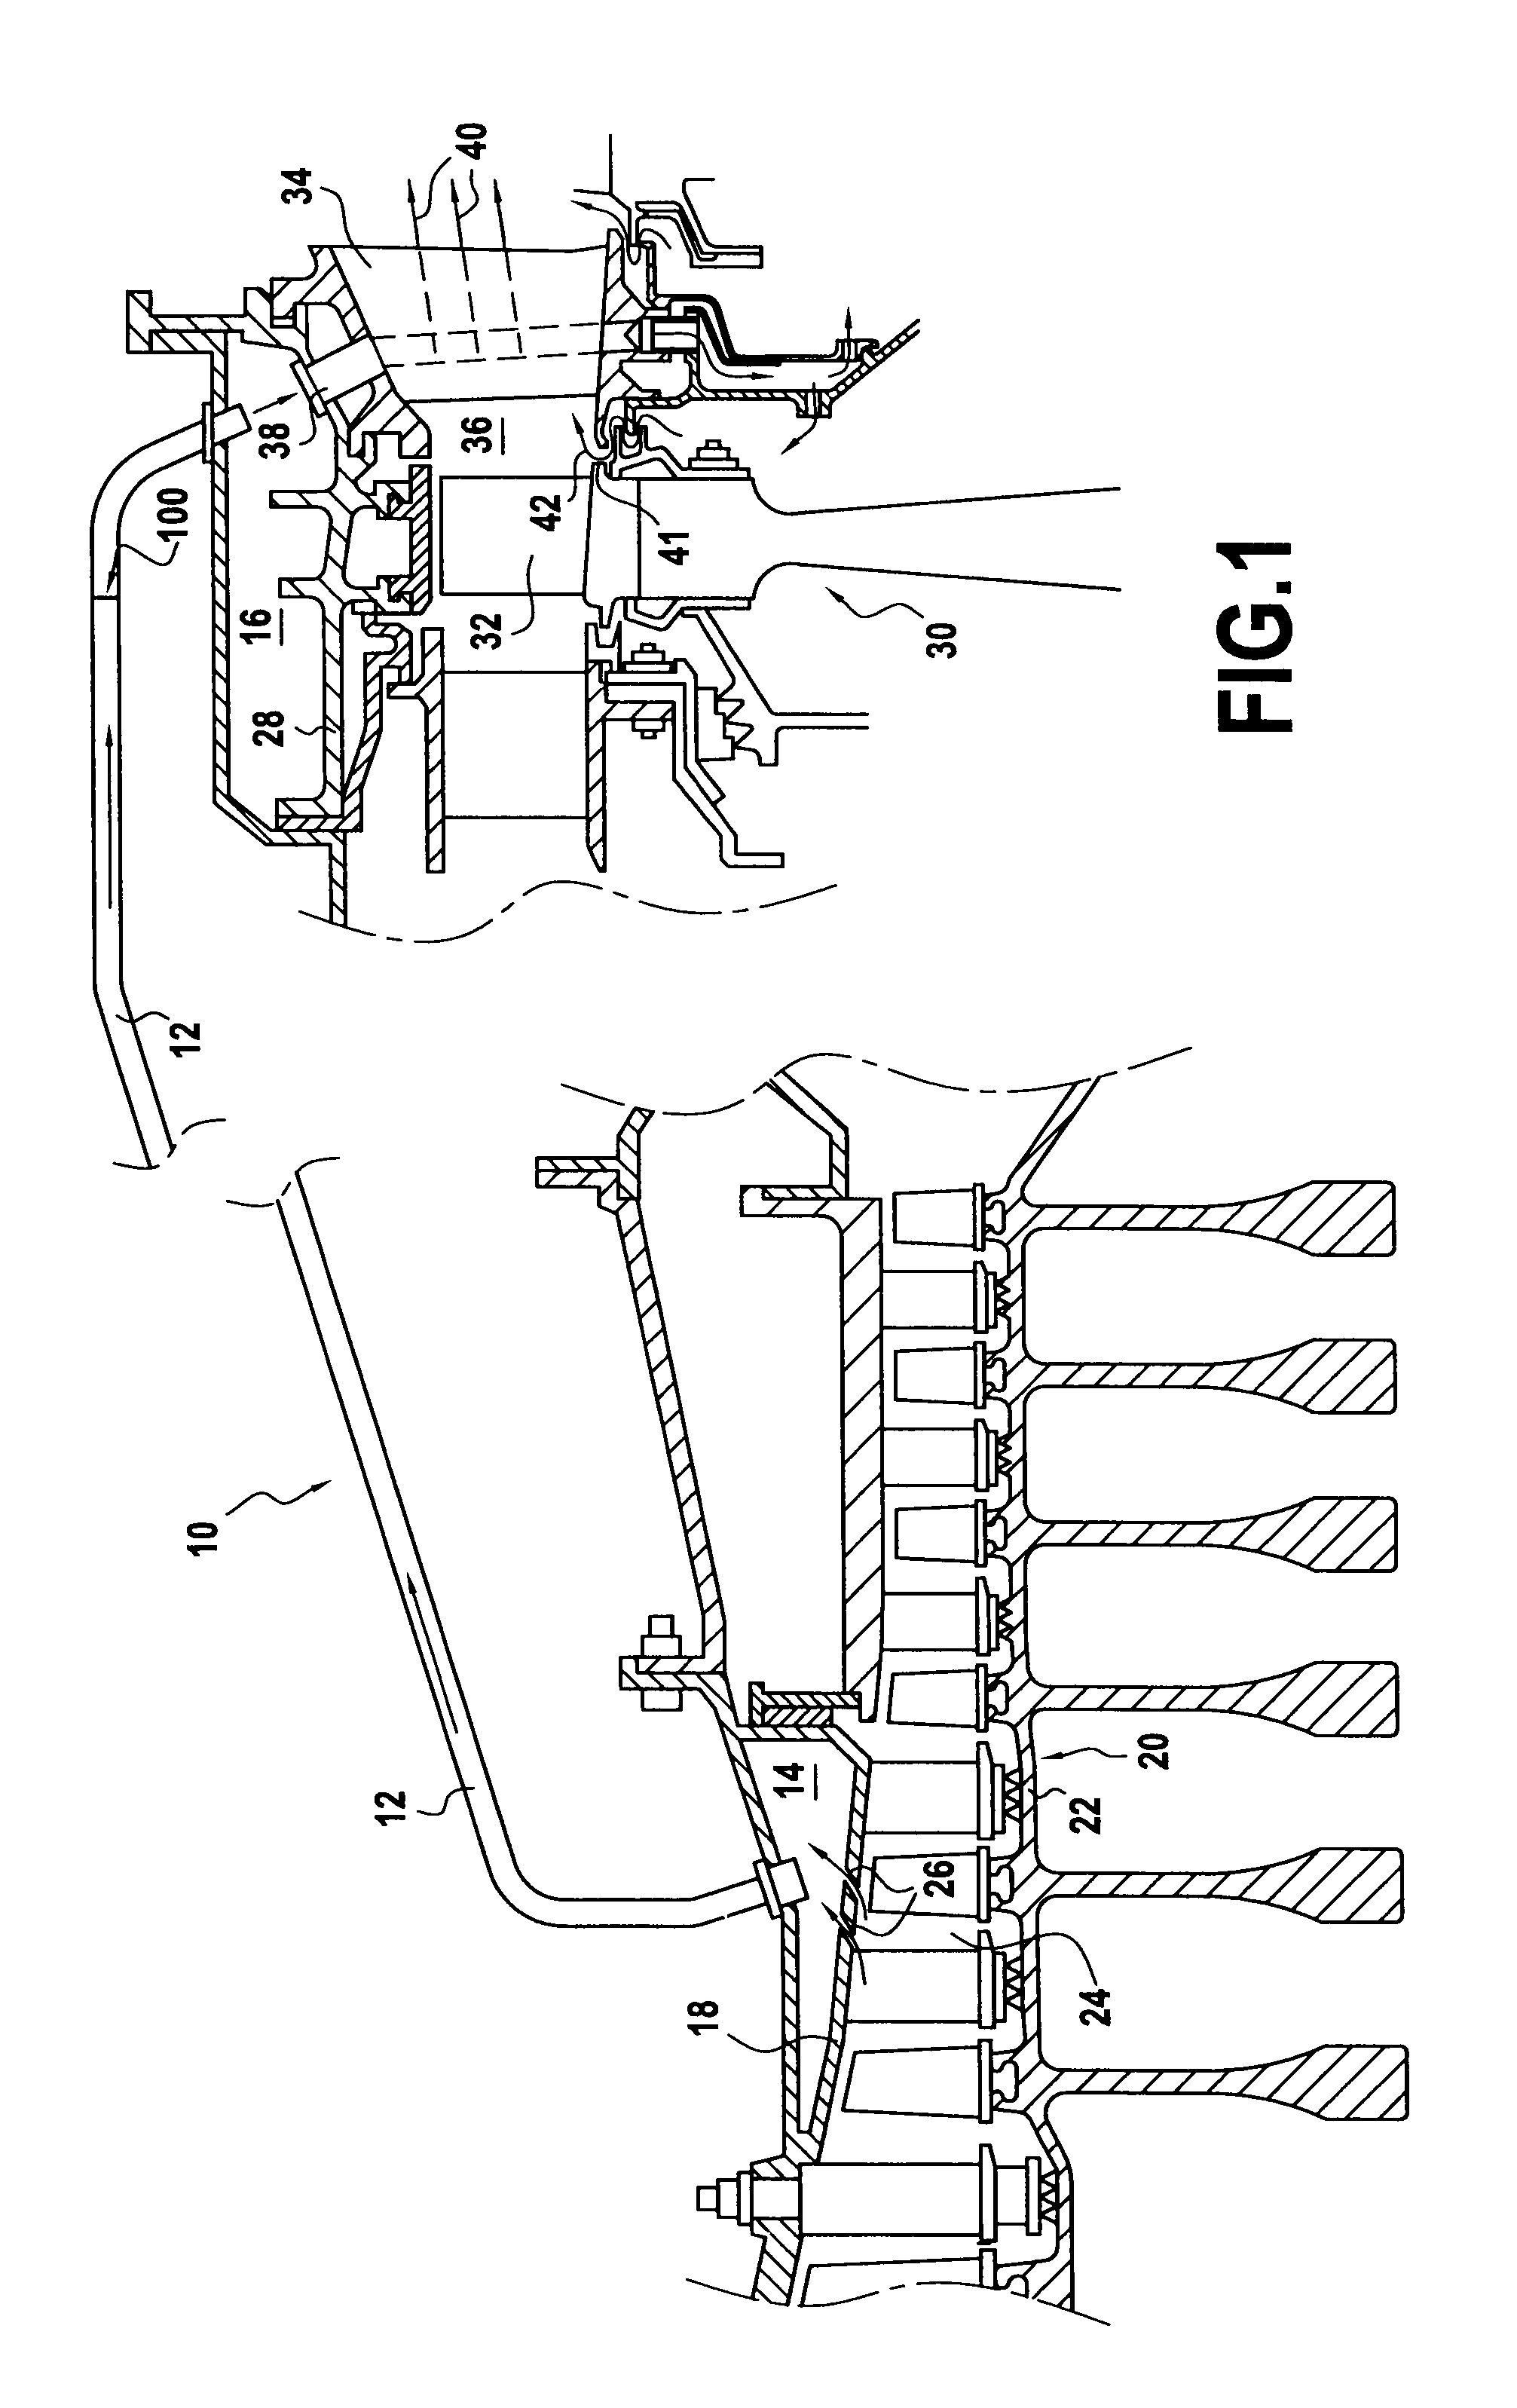 Device for regulating the flow rate of air feeding a turbine ventilation cavity of a turbomachine turbine section